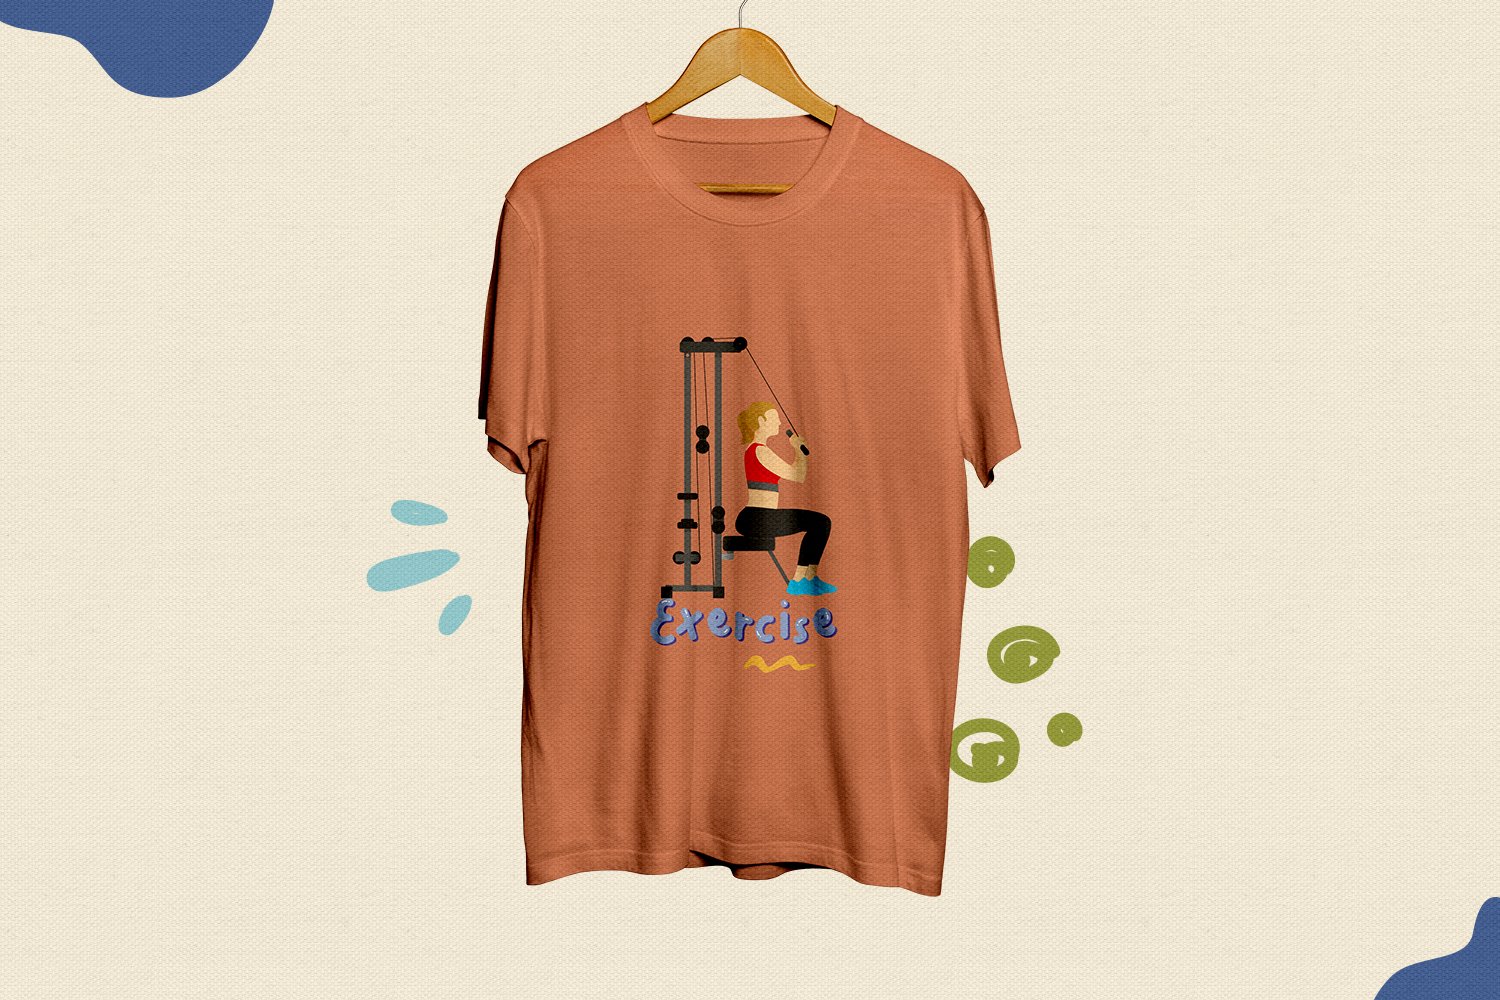 T-shirt with prints image of a sports simulator.